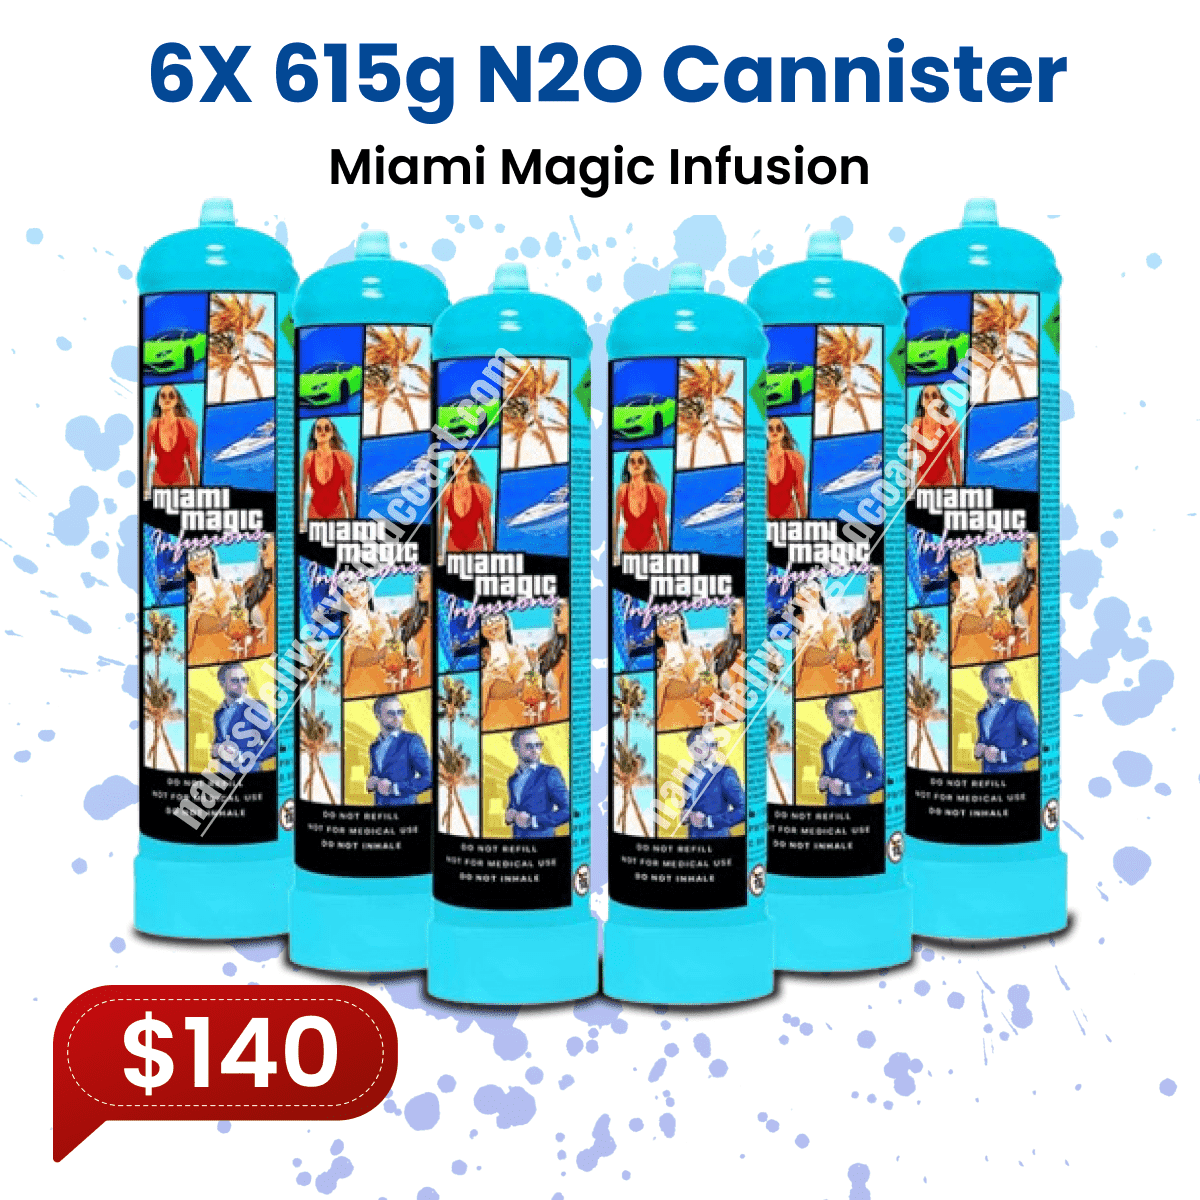 Miami Magic Infusions 615g N2O Cannister (6 Bottles)